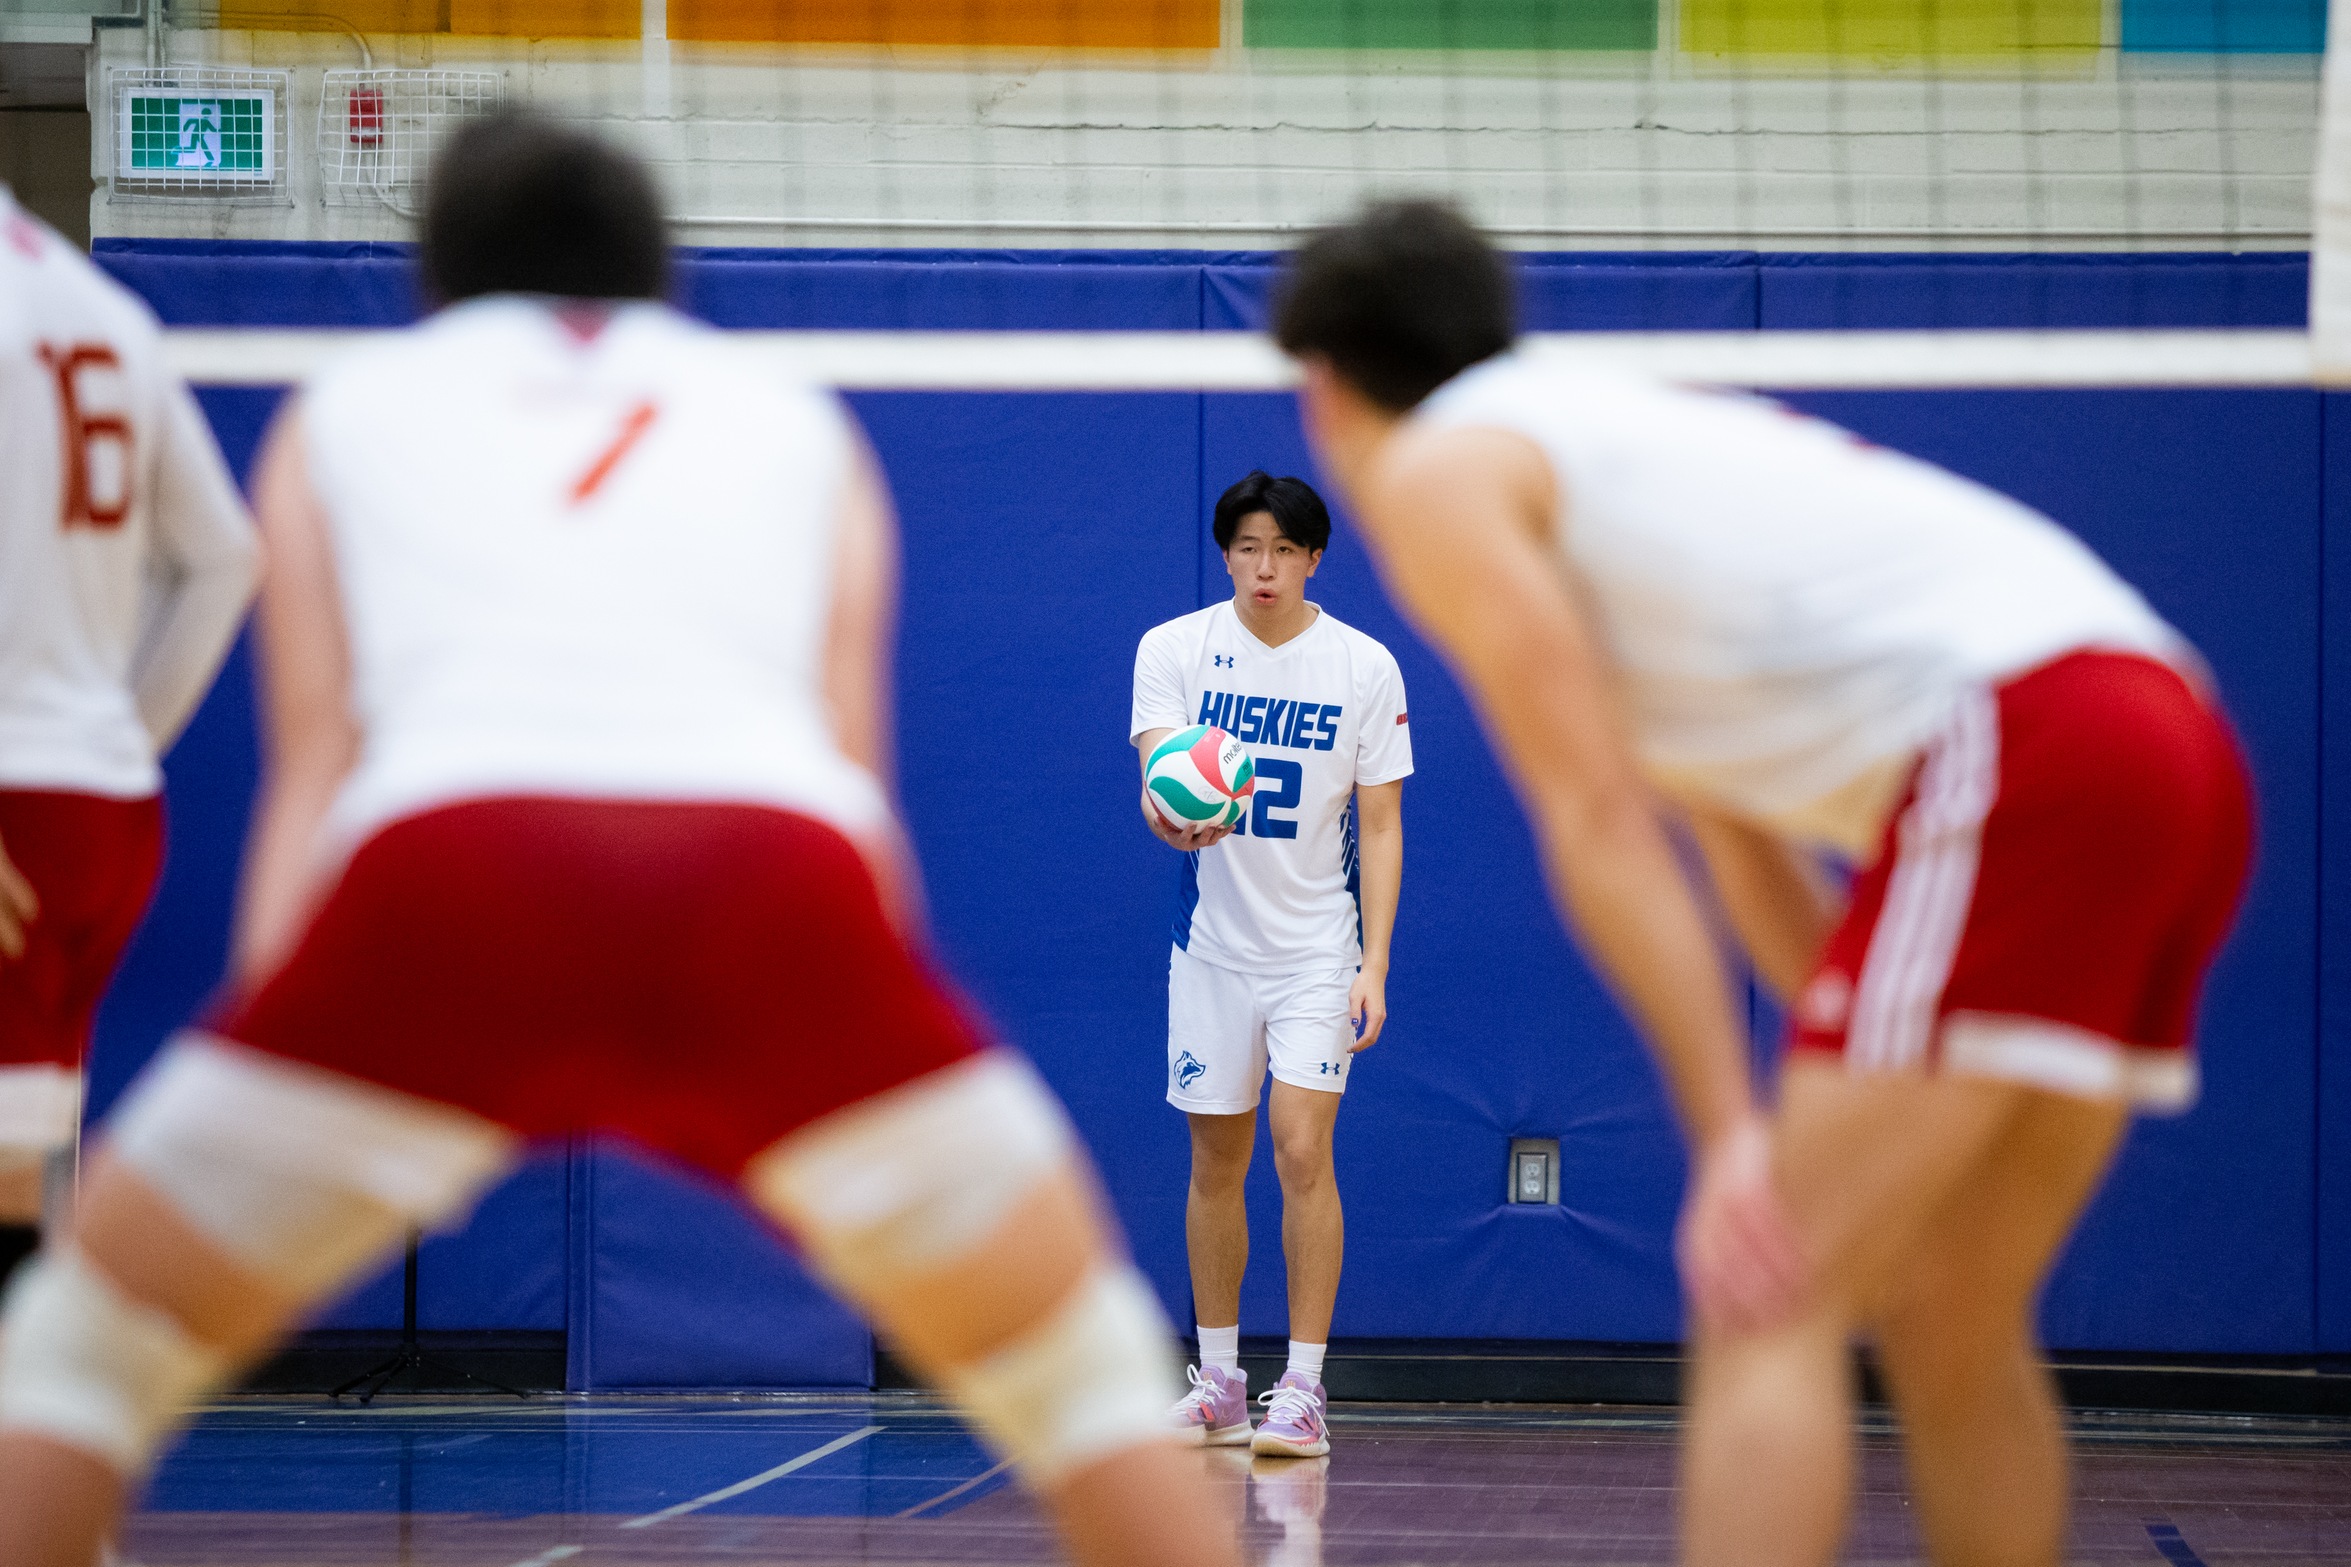 Huskies players waits to serve ball in the distance, between two defensive players at the net